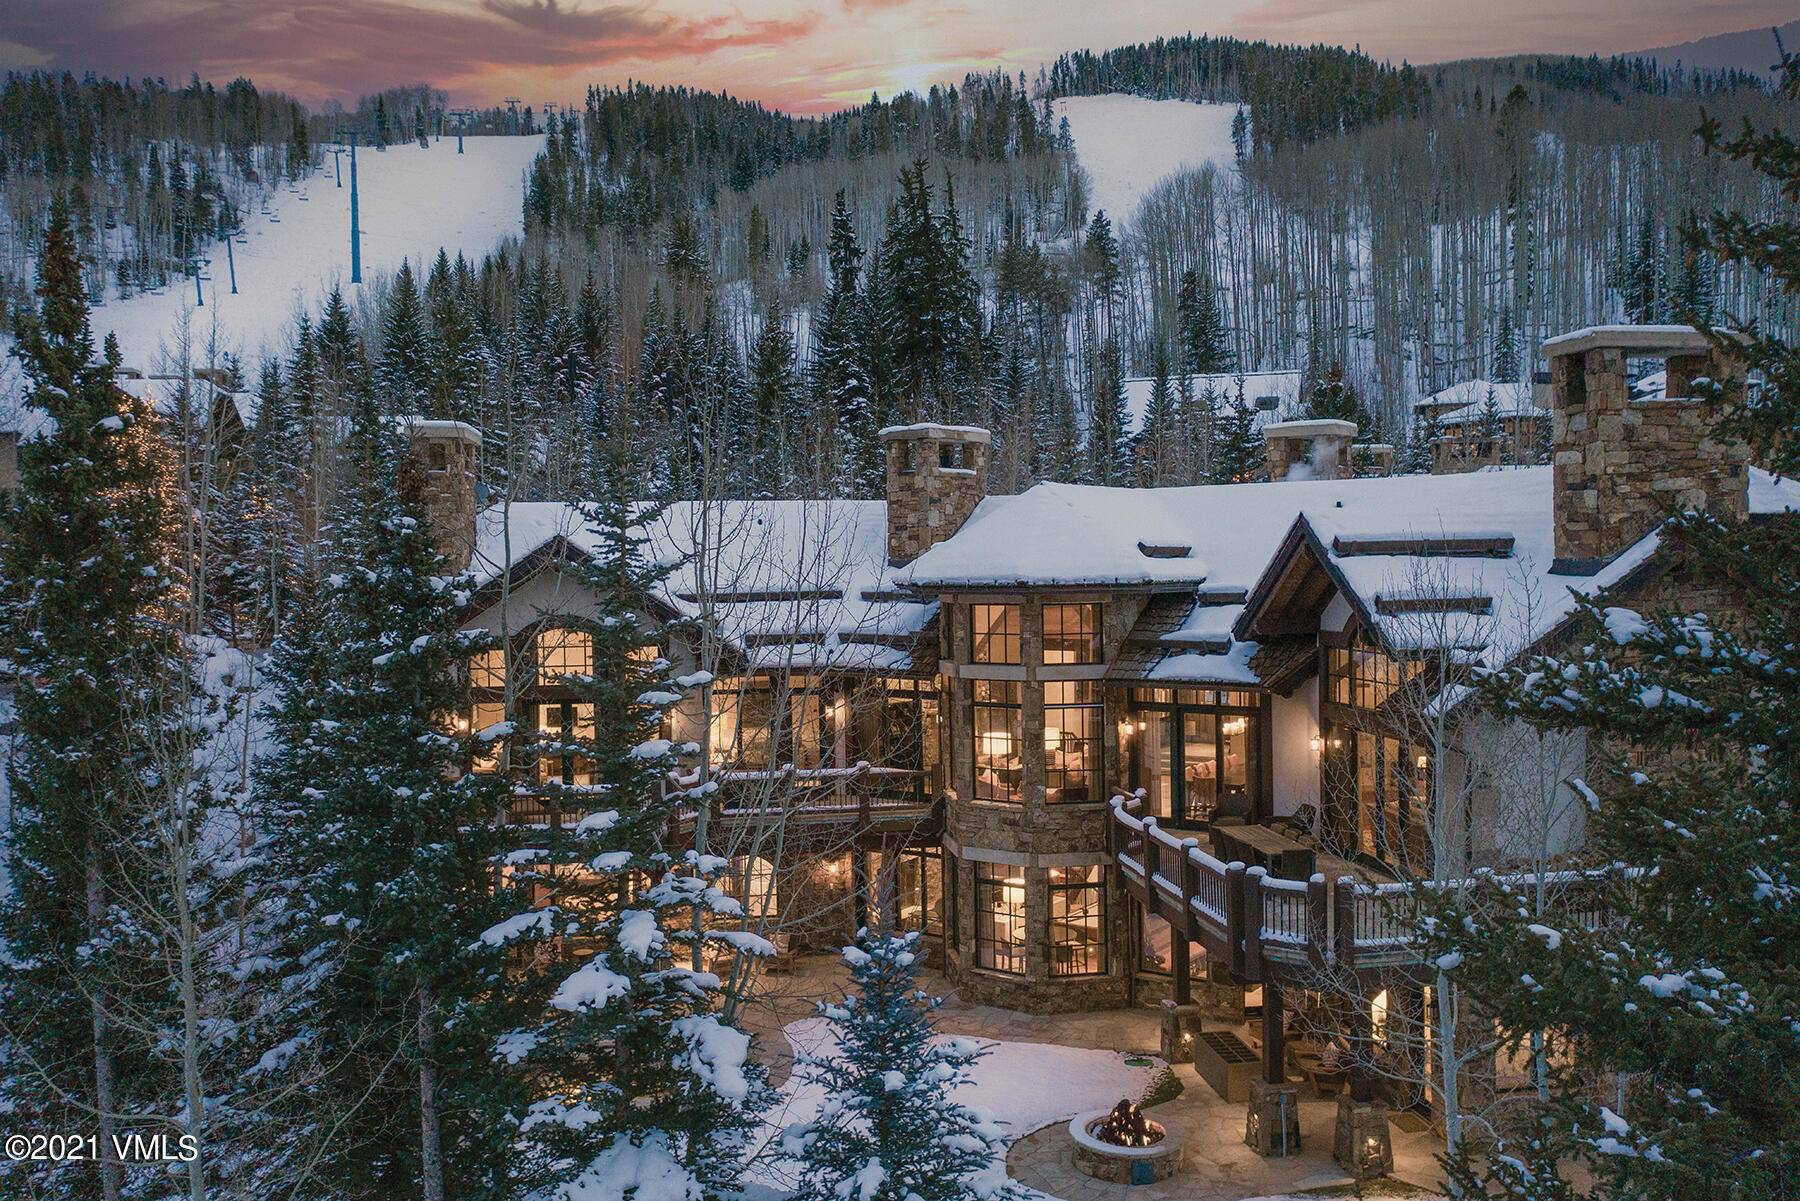 Newly Remodeled and Renovated Luxury Vail Mountain Chalet with Ski In Ski Out Eagle Bahn Gondola AccessOne of only four custom residences nestled in a private enclave on Vail's revered ...